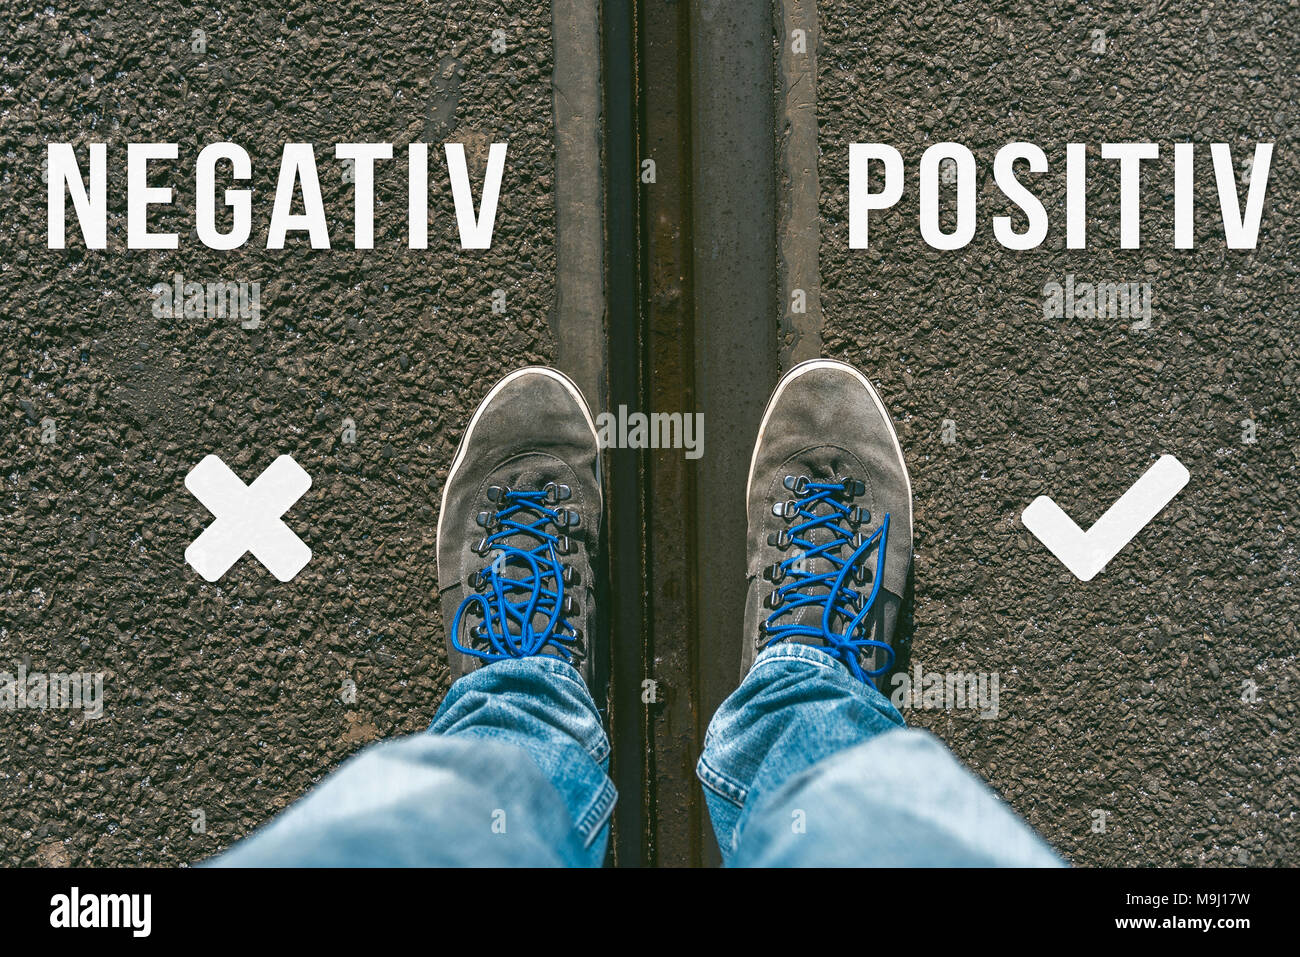 Reaching a crossroads having to decide between negativ and positiv in german meaning negative and positive symbolized by two feet and shoes standing o Stock Photo